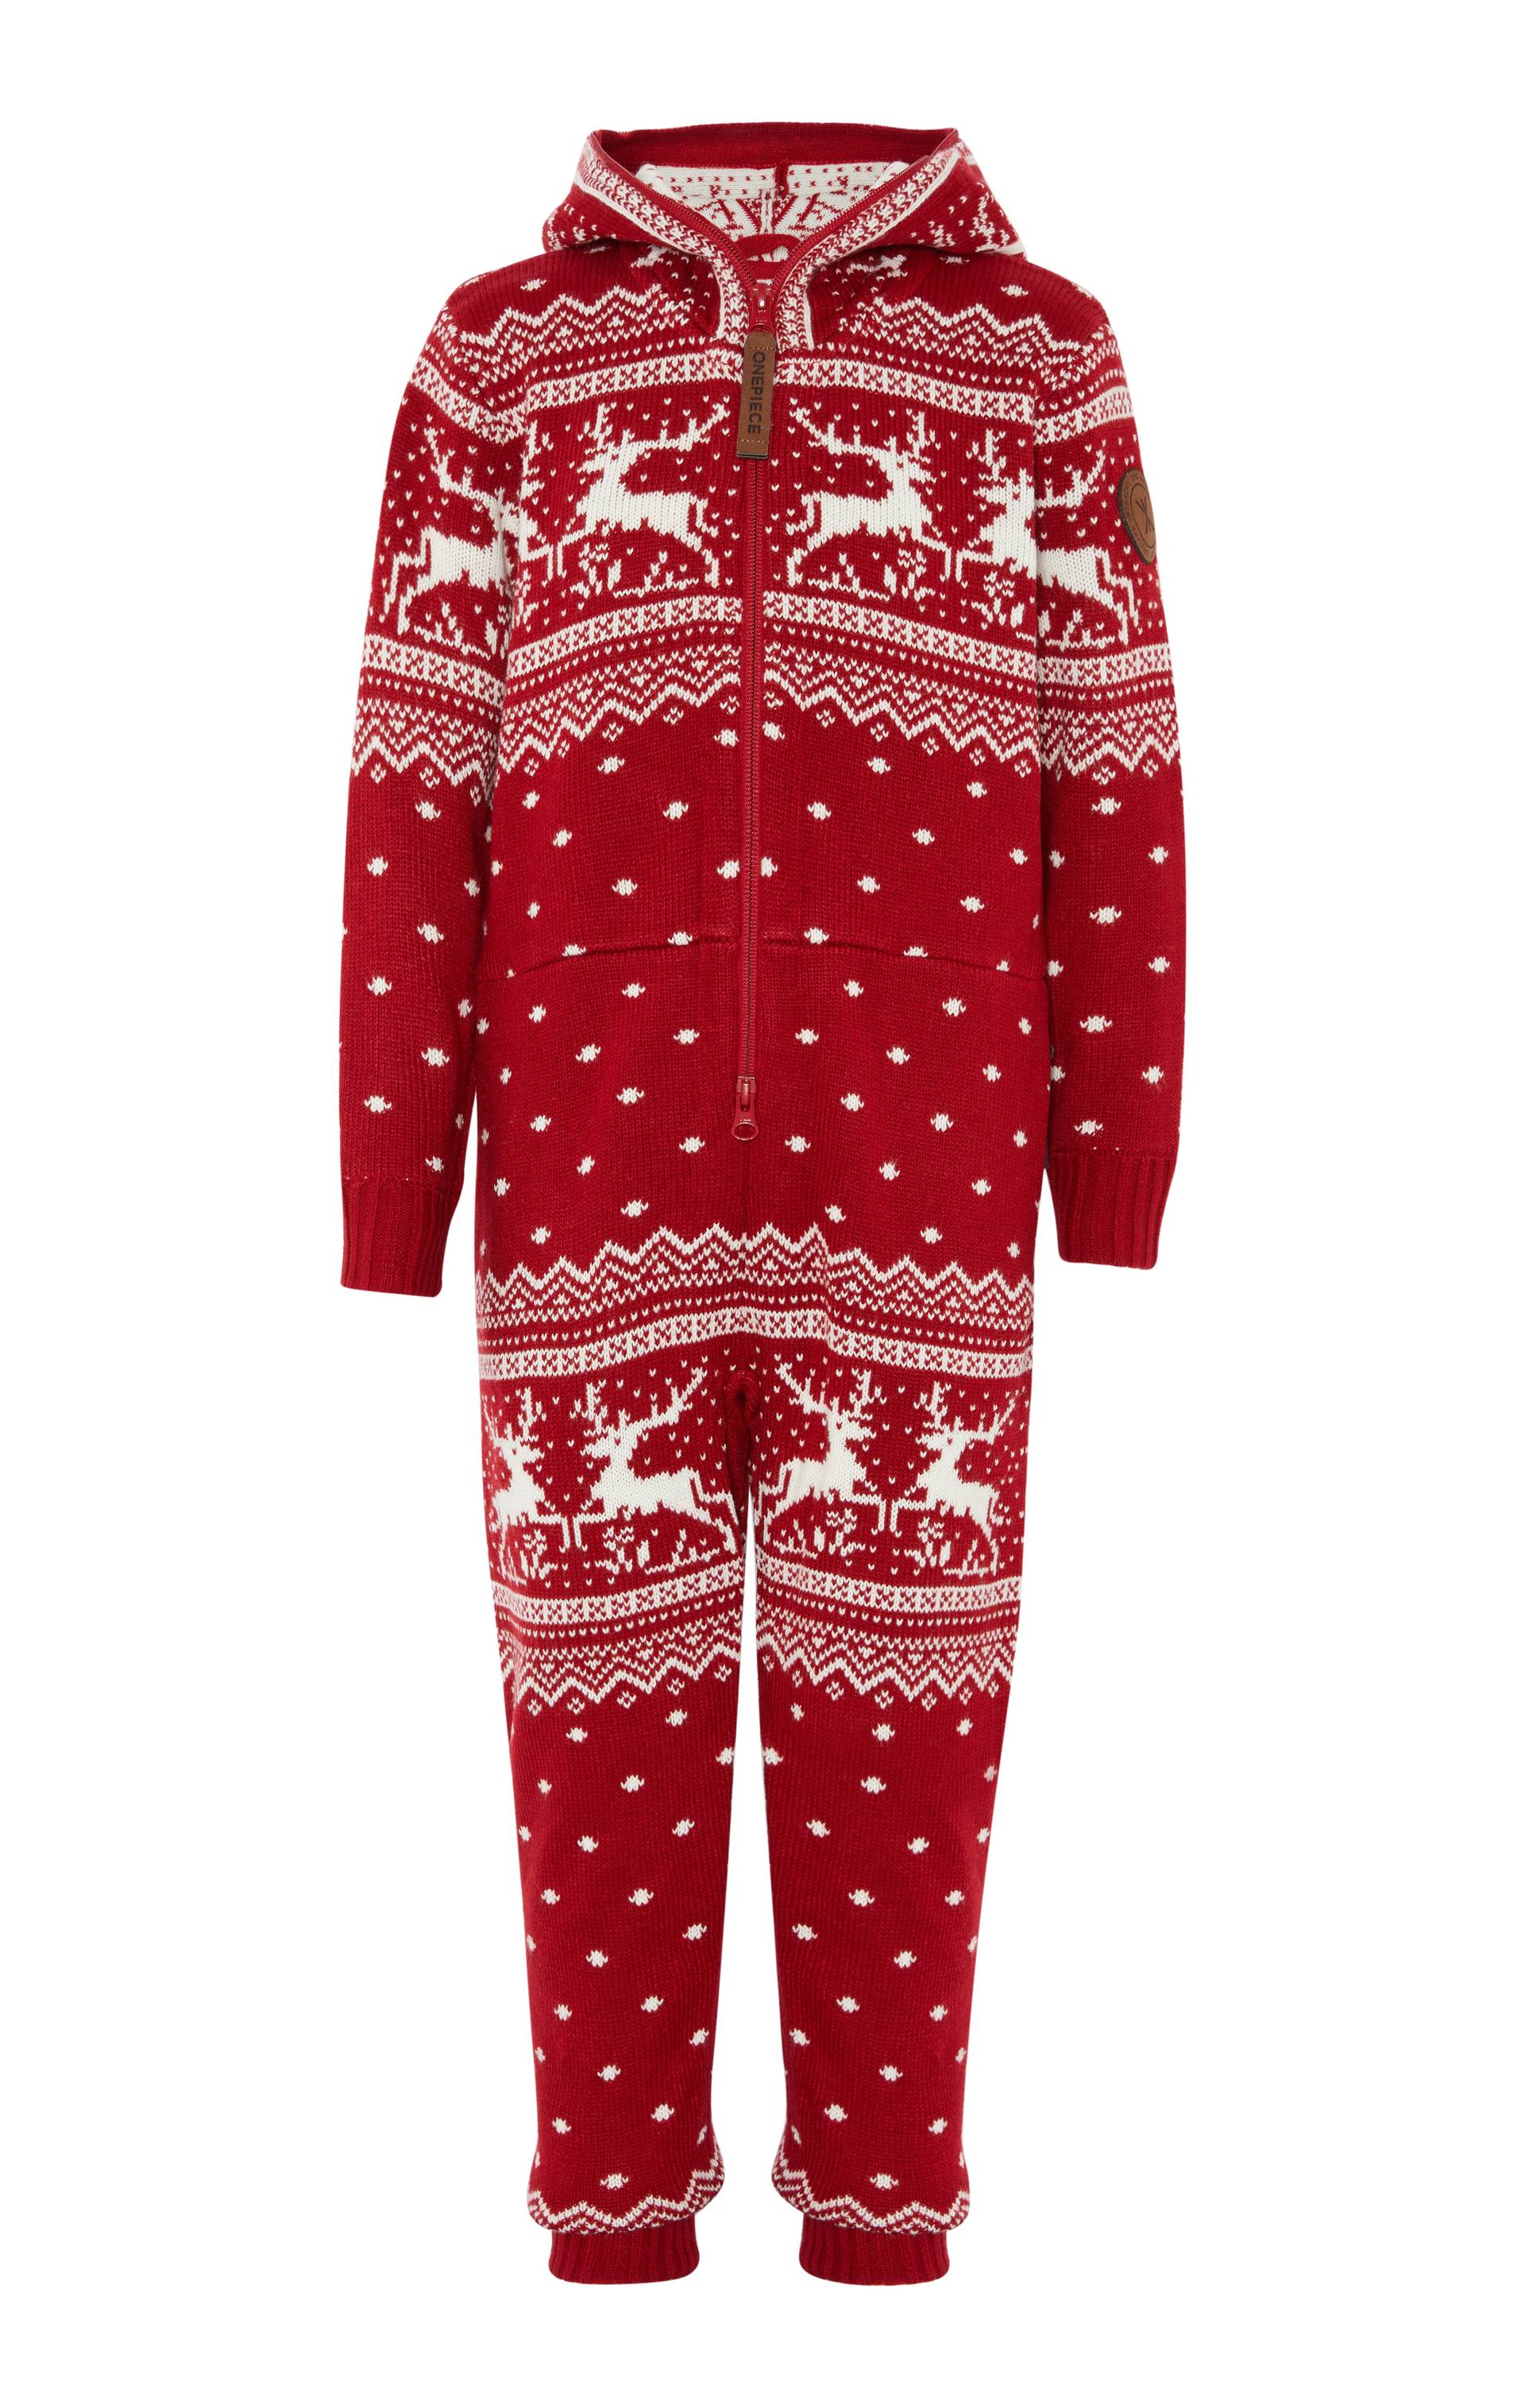 Onepiece Holidays Are Coming KIDS Onesie Jumpsuit Red - 5